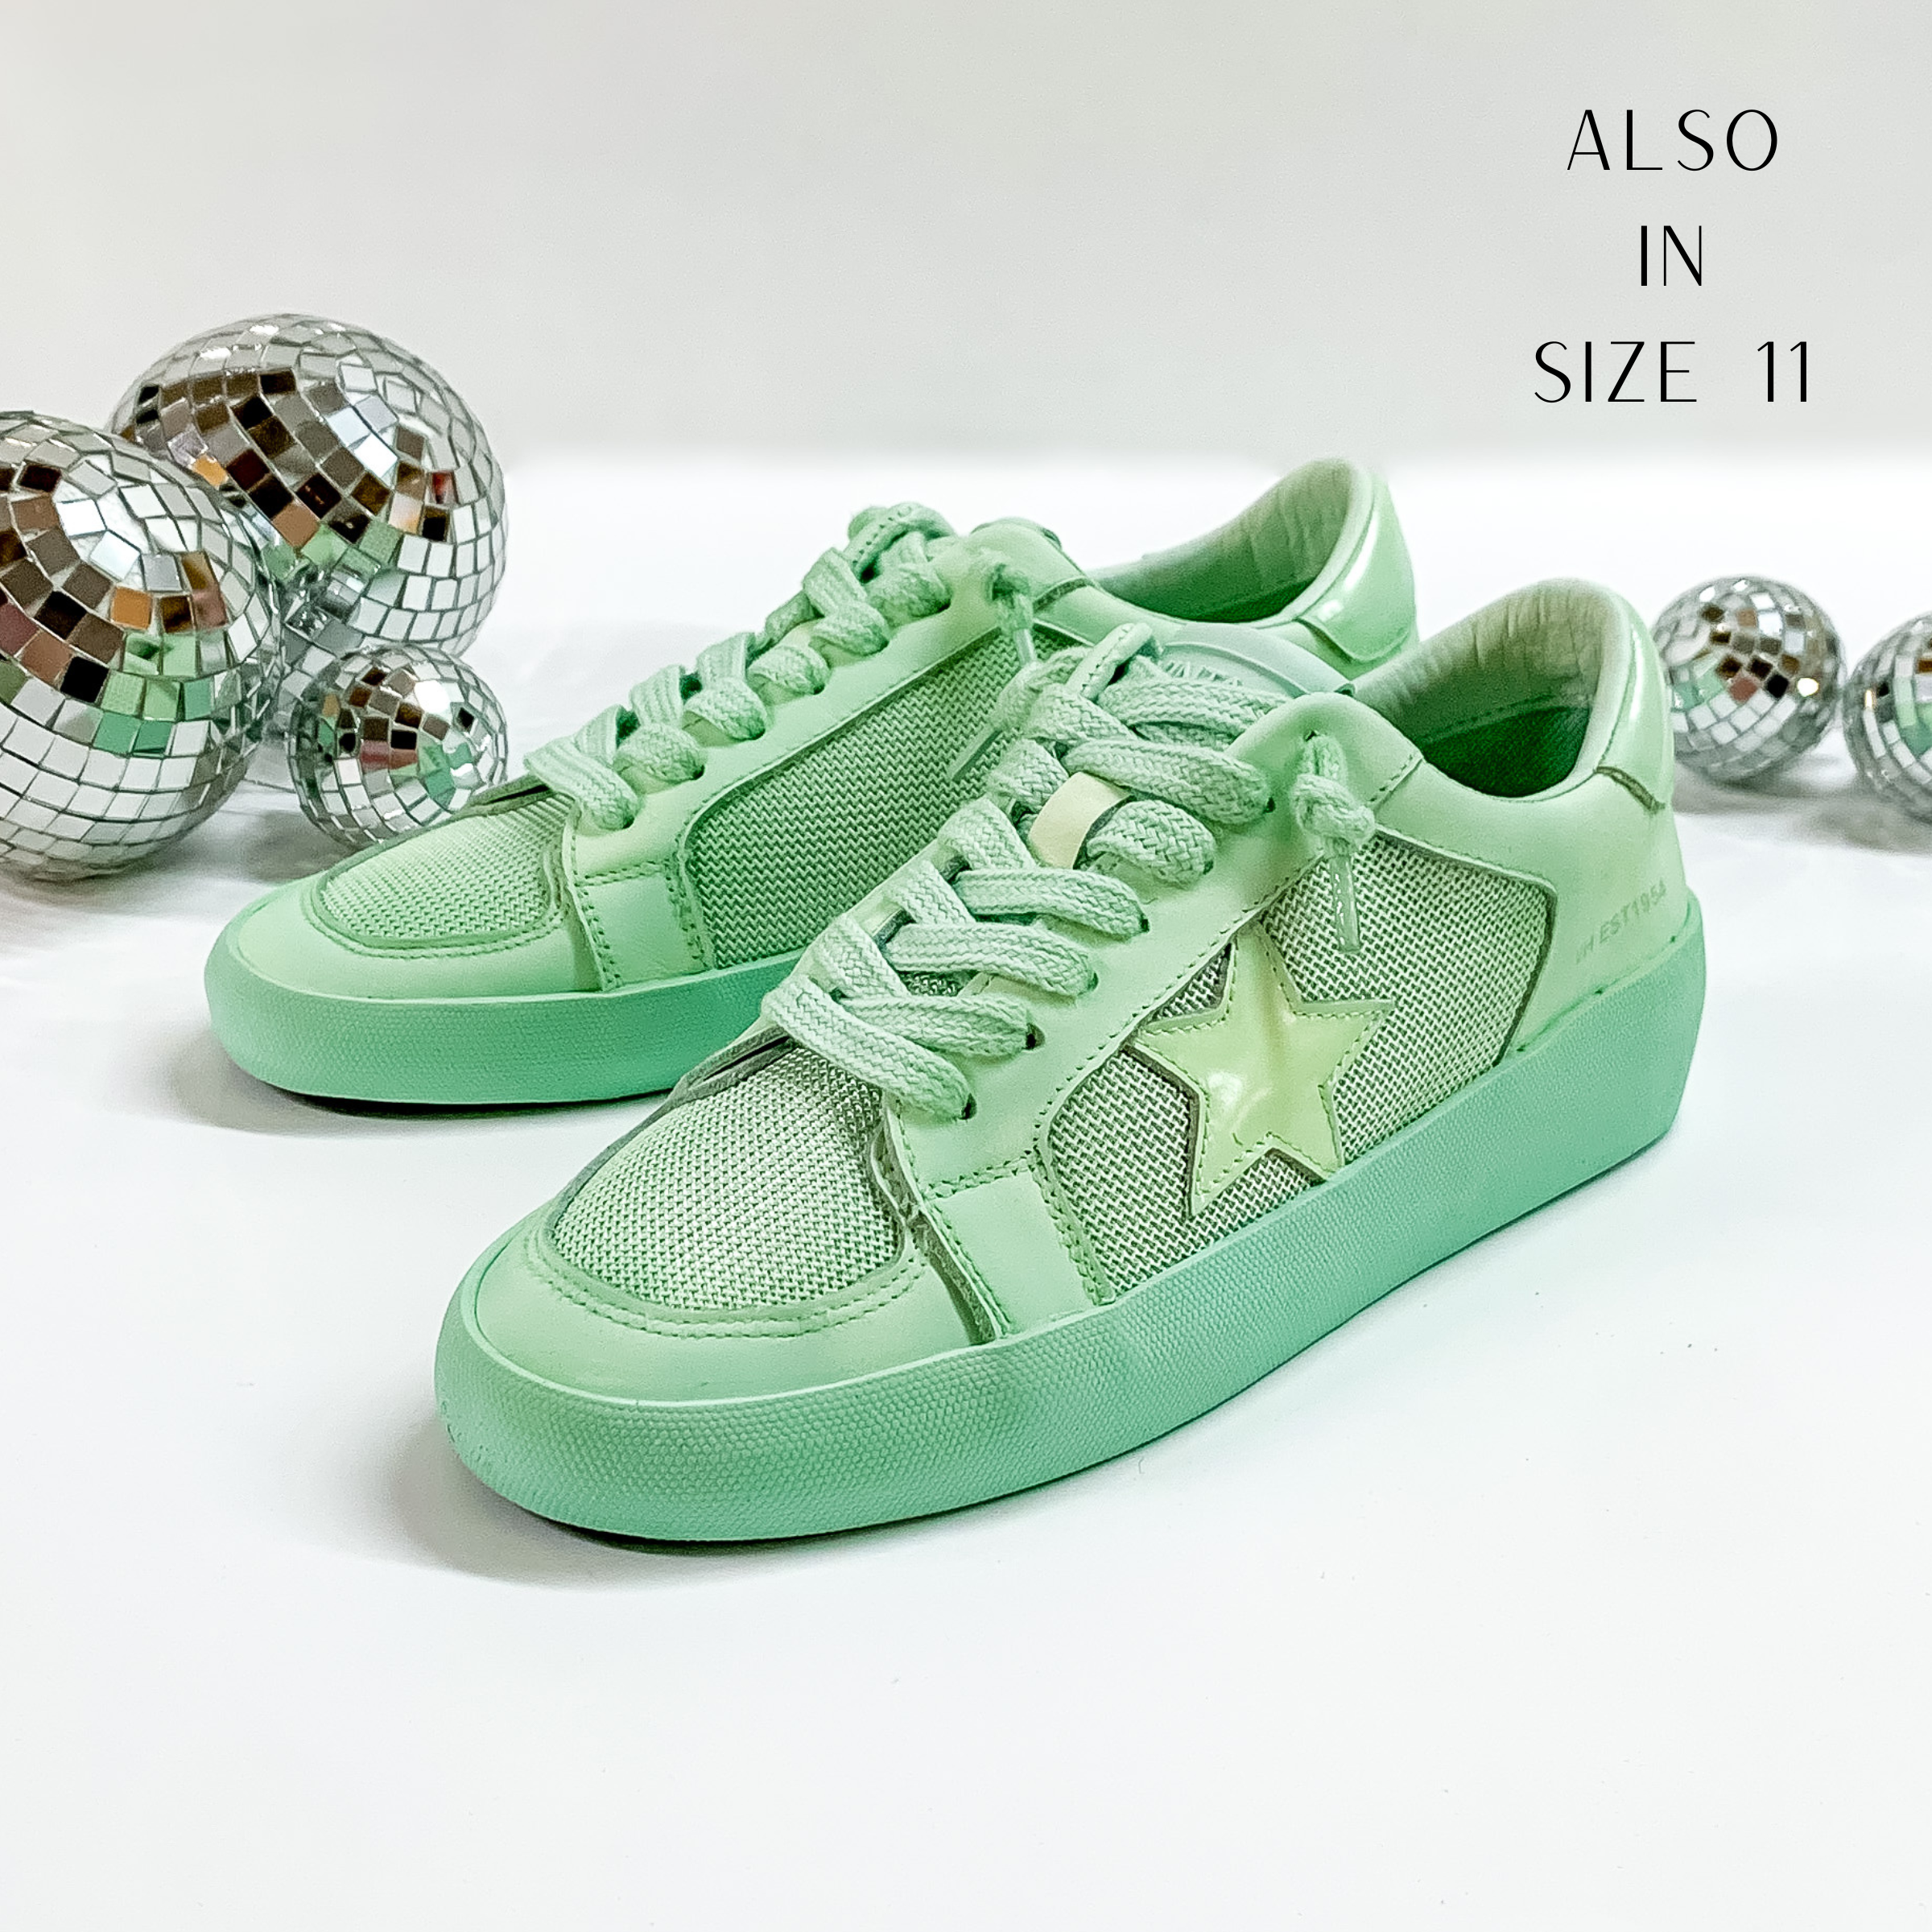 Mint green colored tennis shoes and shoelaces. The tennis shoes also have a mint green star patch on the side of the shoe. These shoes are pictured on a white background with disco balls behind them. 